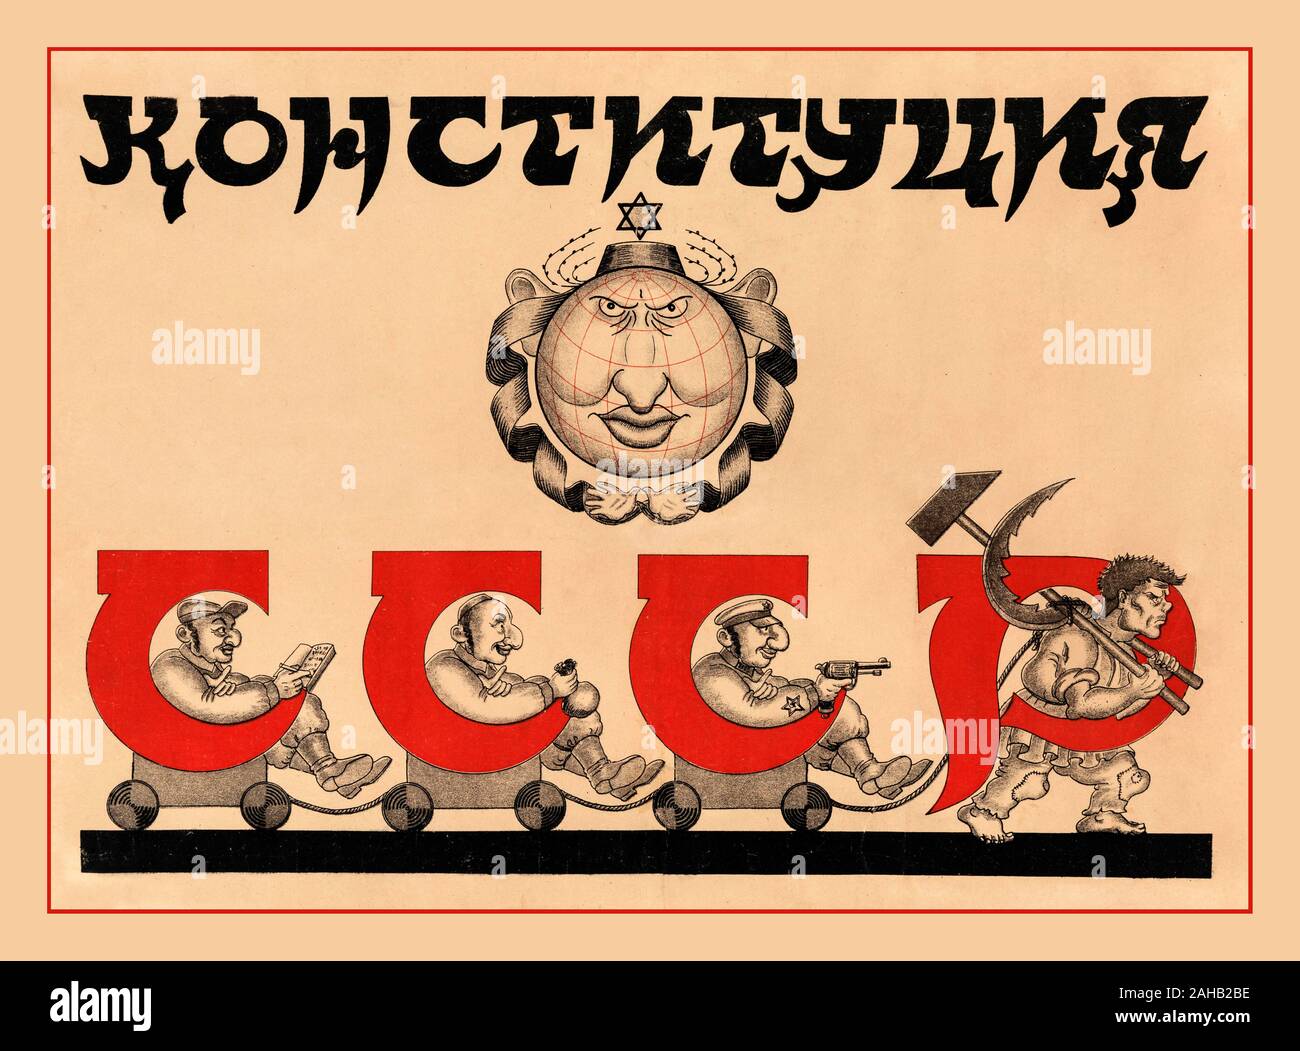 VINTAGE 1930’s SOVIET RUSSIAN ANTI-SEMITIC PROPAGANDA POSTER FROM THE 1930s CCCP ANTI-JEWISH STEREOTYPE CARTOON SHOWING RUSSIAN WORKER CARRYING HAMMER AND SICKLE AS A WORKER SLAVE TO JEWISH MASTERS DOMINATING THE WORLD. KONSTITUTSIYA SSSR [Constitution of the USSR], 1930s, color lithograph Stock Photo